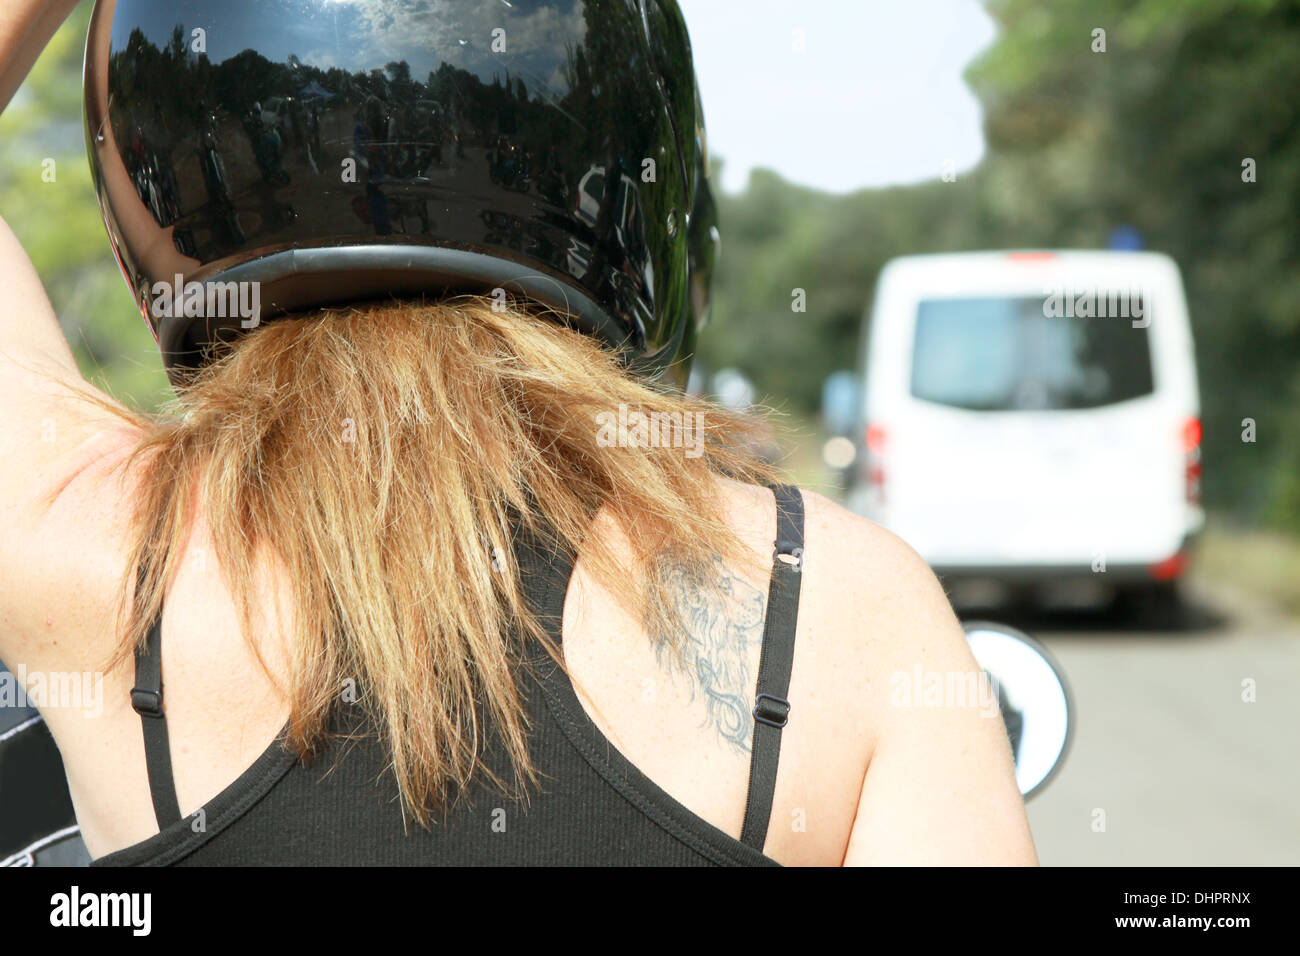 girl on motorbike with lion tattoo Stock Photo